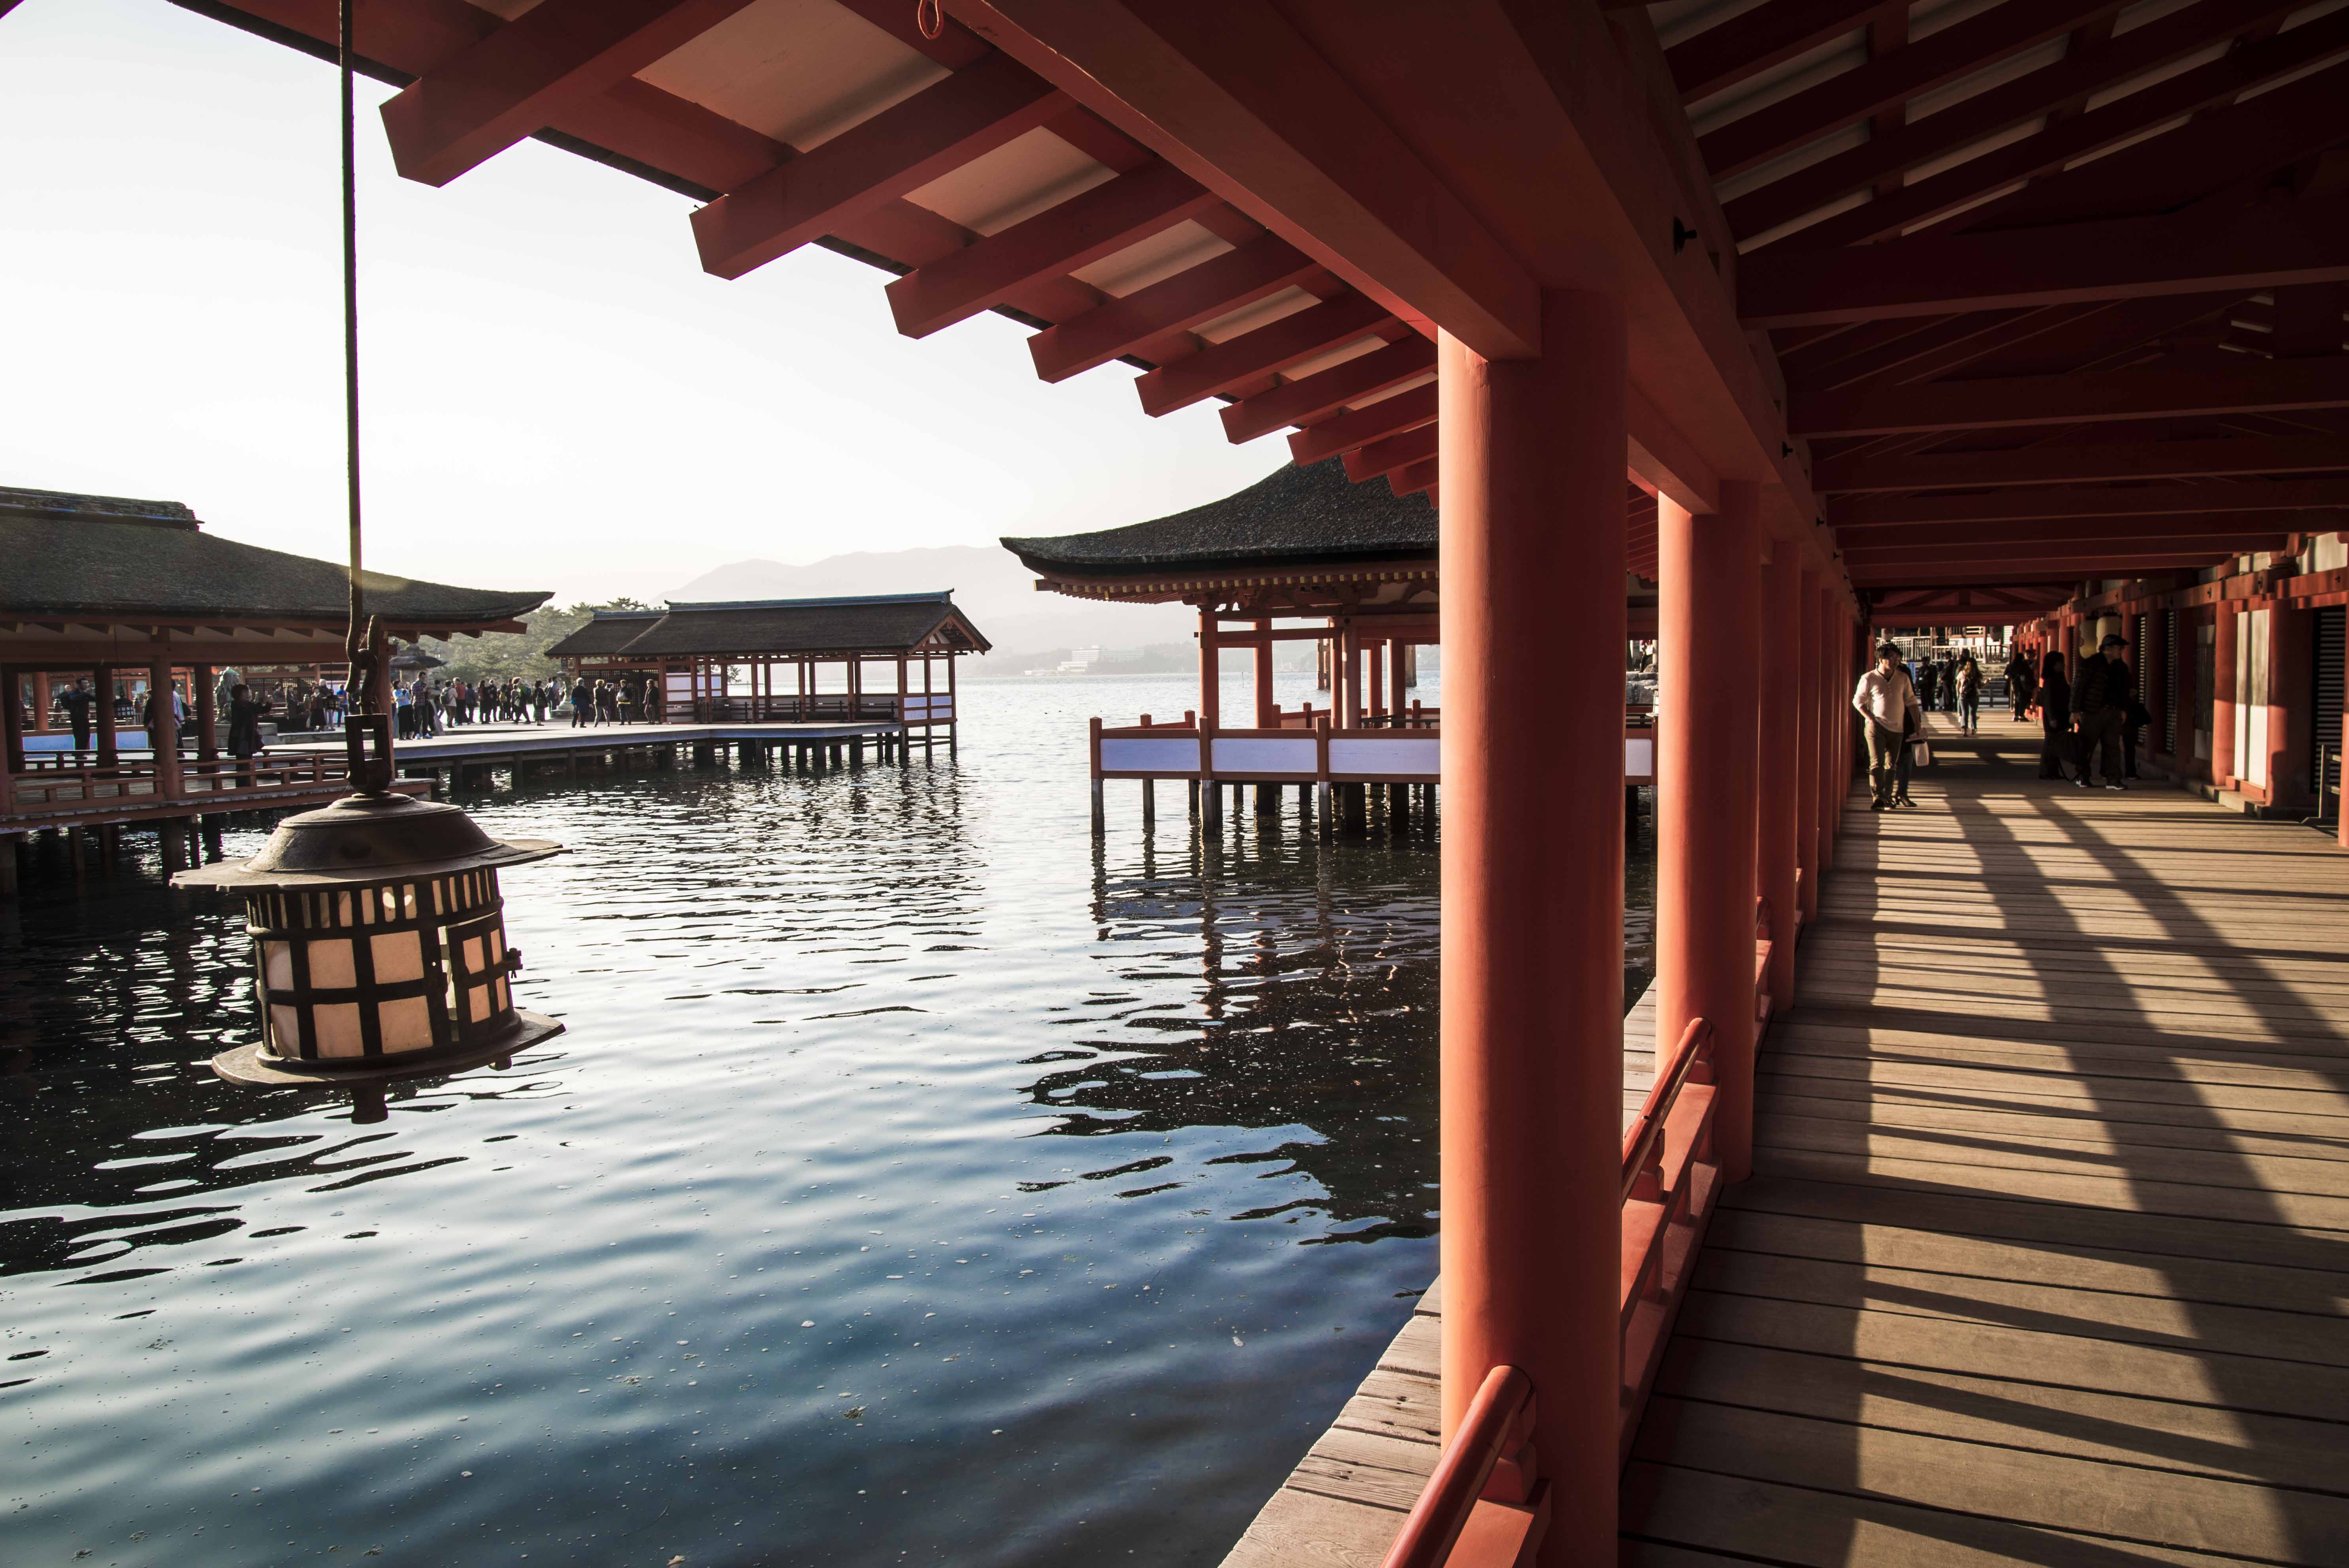 Itsukushima Shrine floats over the bay on stilts, containing over 1400 years of history.